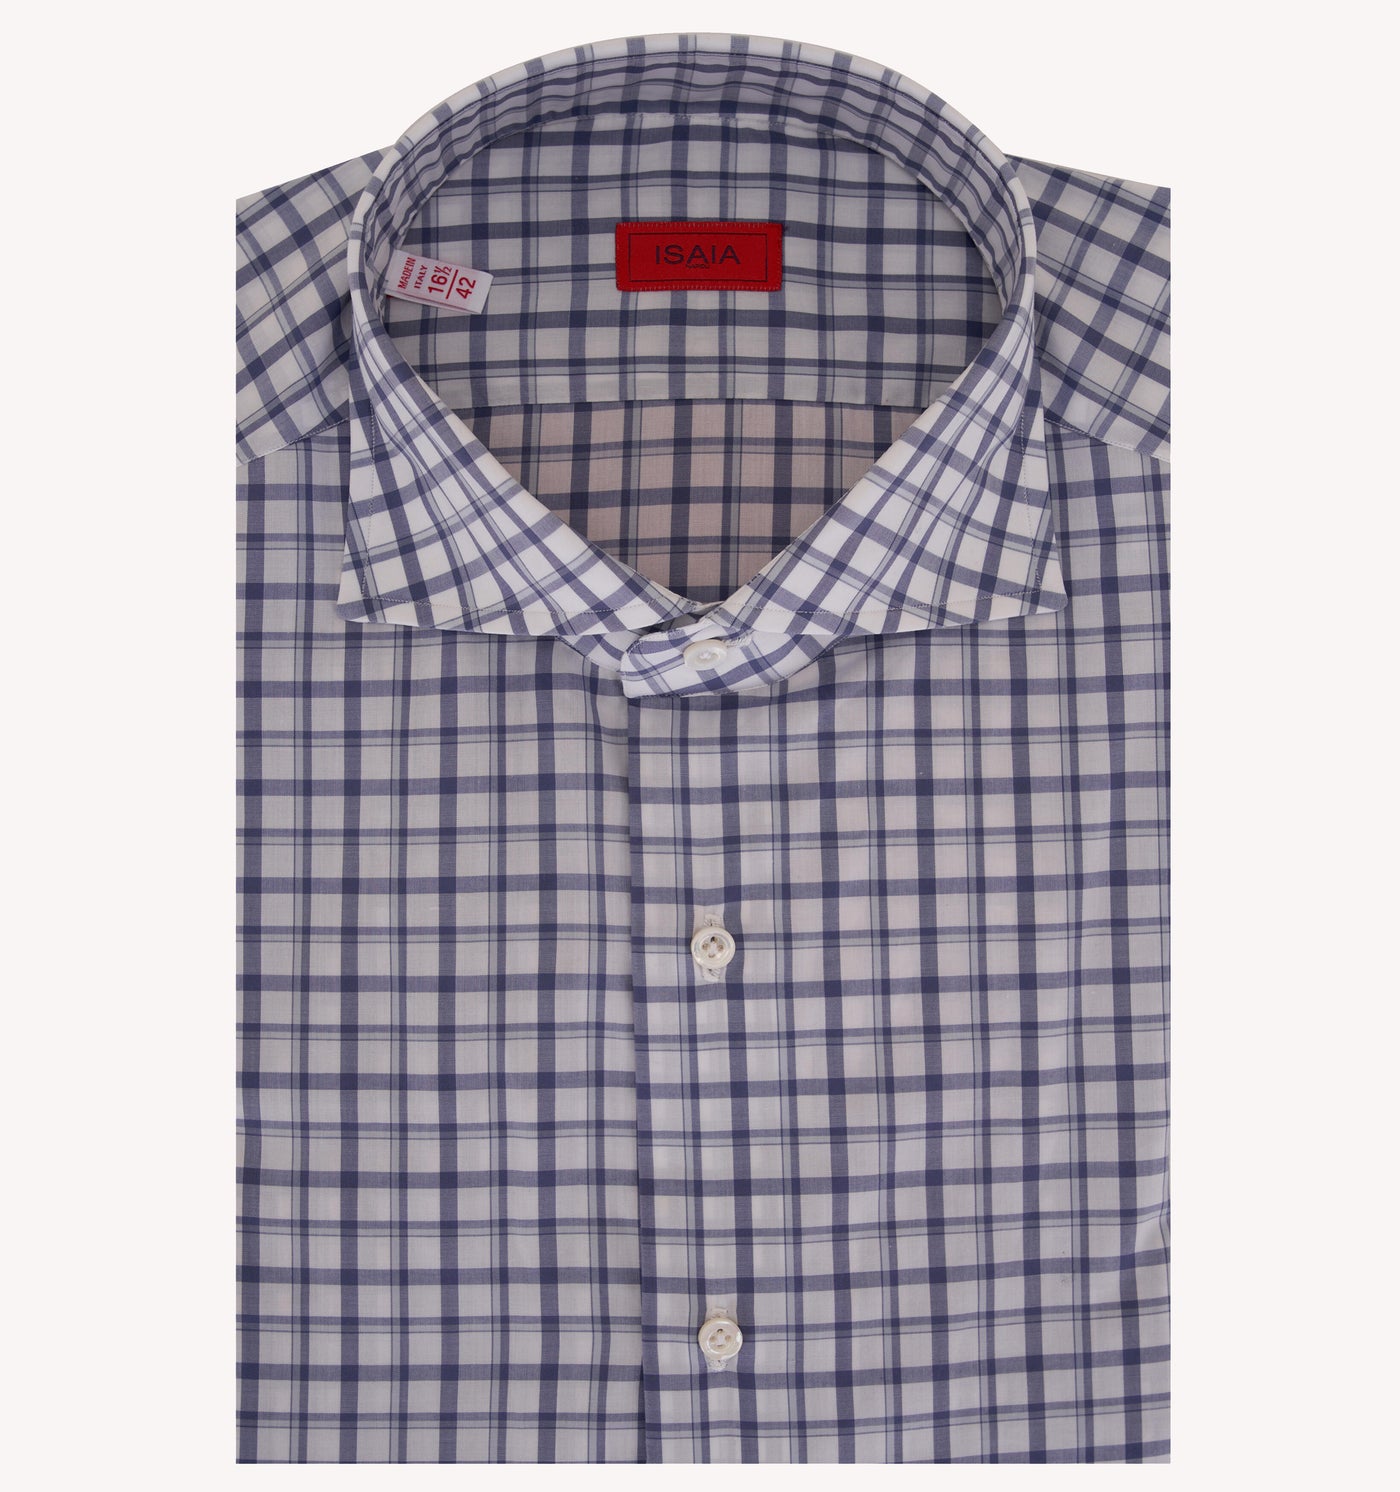 Isaia Check Dress Shirt in Blue